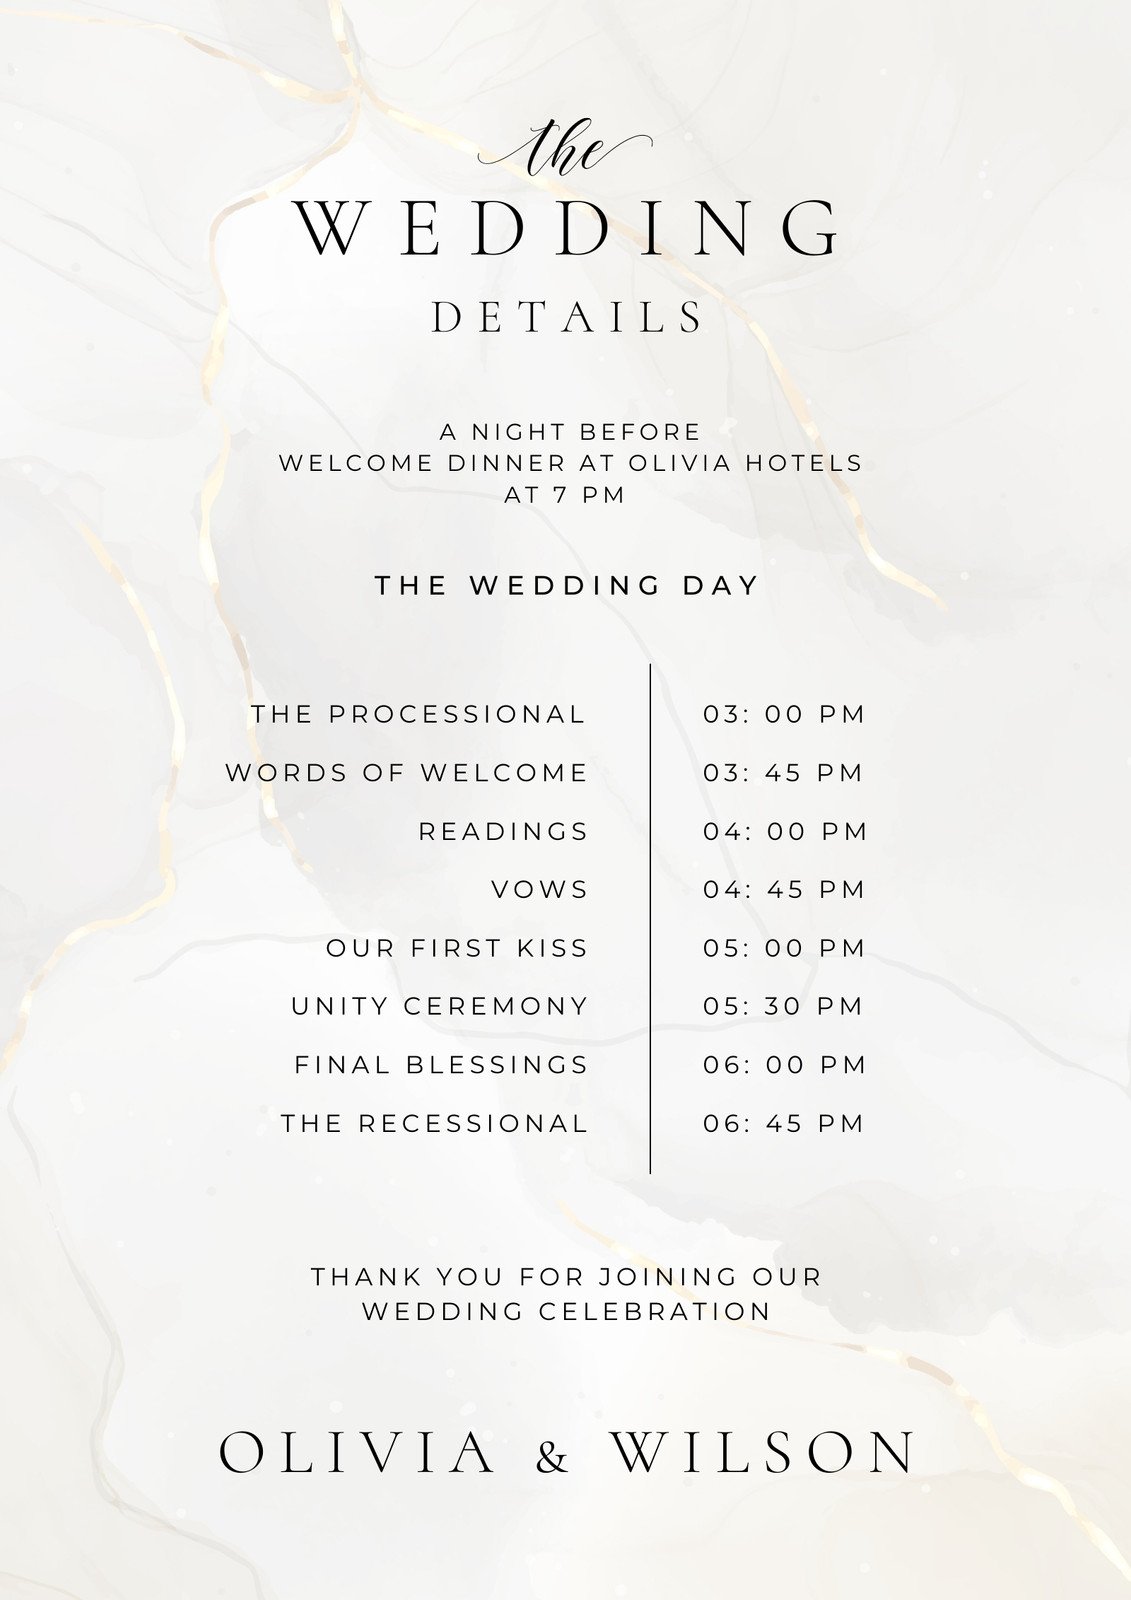 FREE Bridal Shower Itinerary Template: Plan Your Perfect Shower With Ease